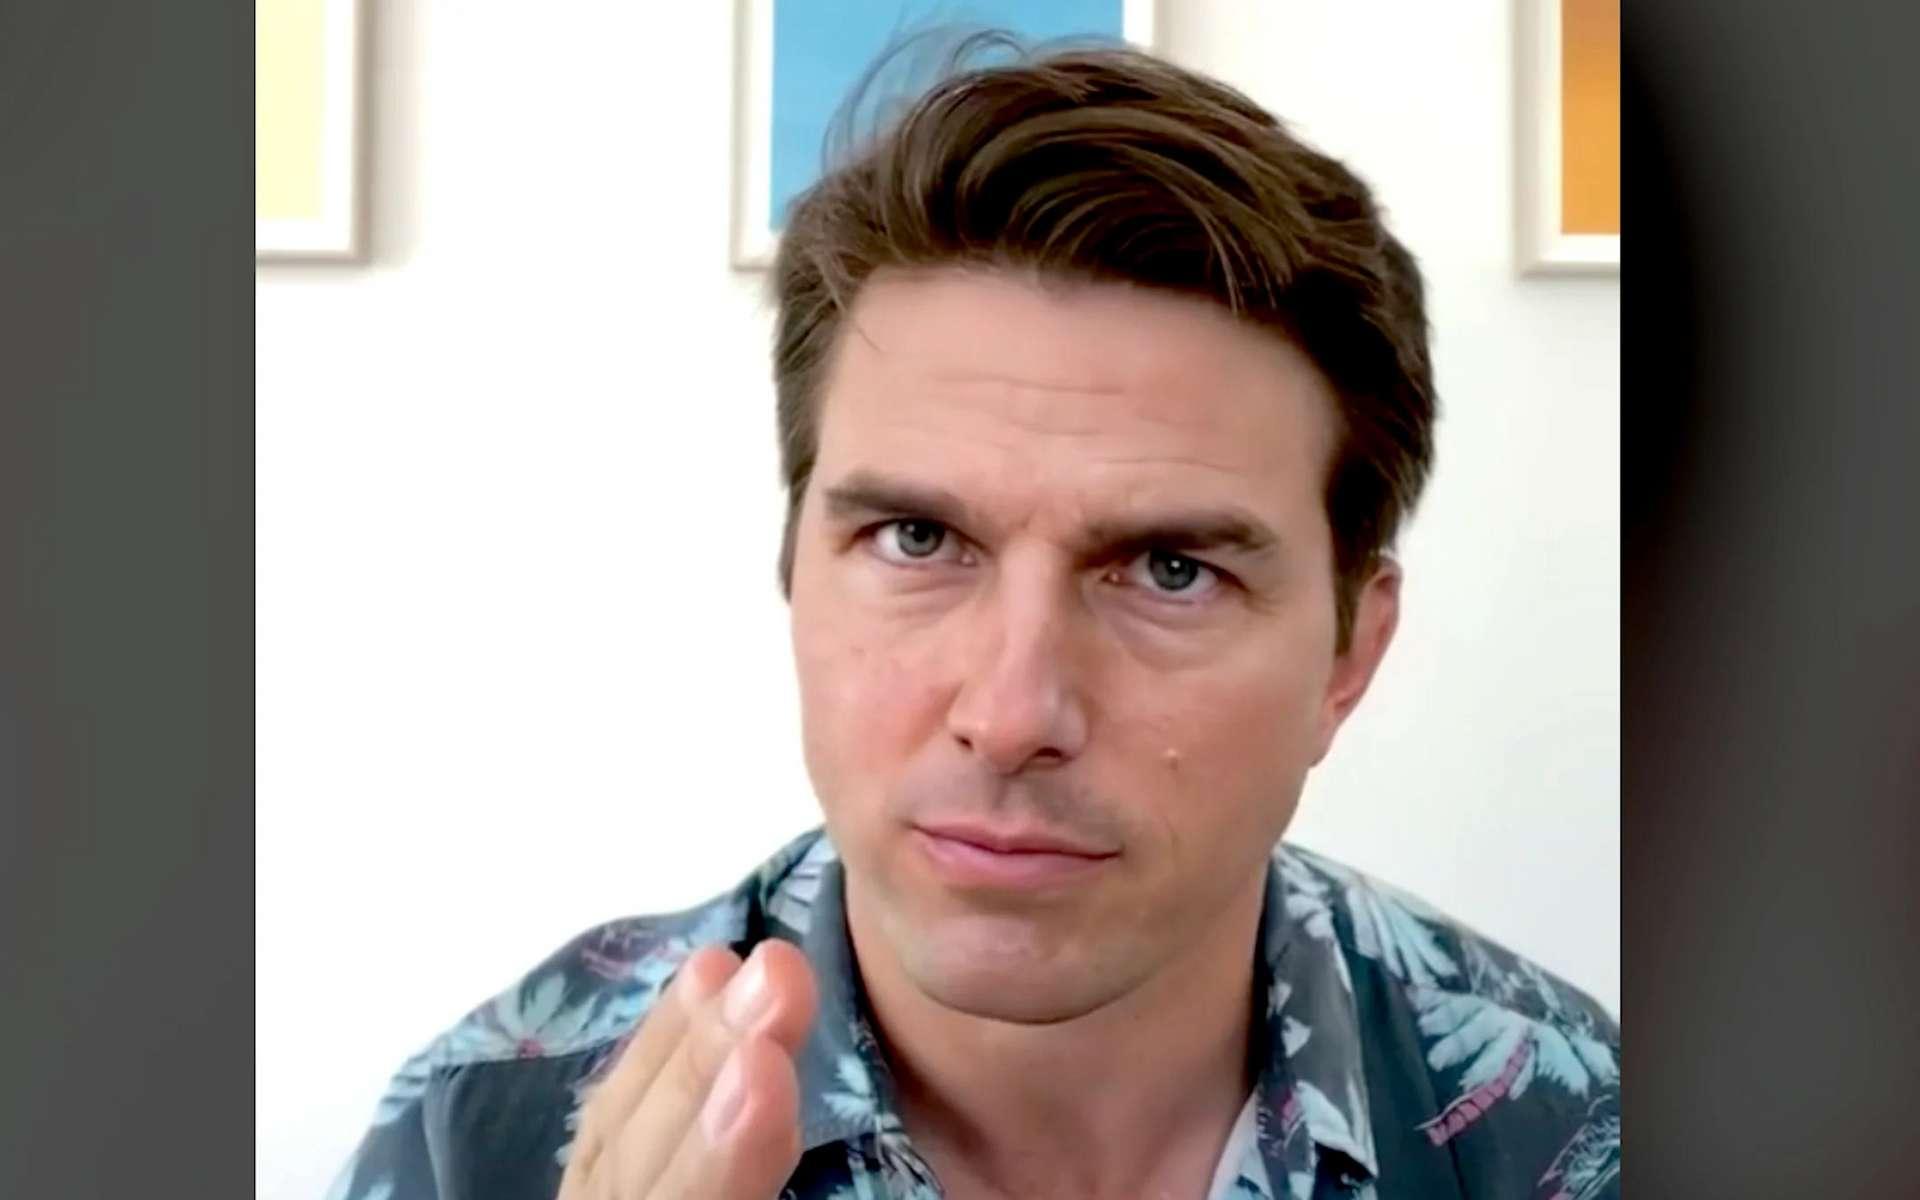 A rendering of Tom Cruise featured in a fraudulent deepfake video.